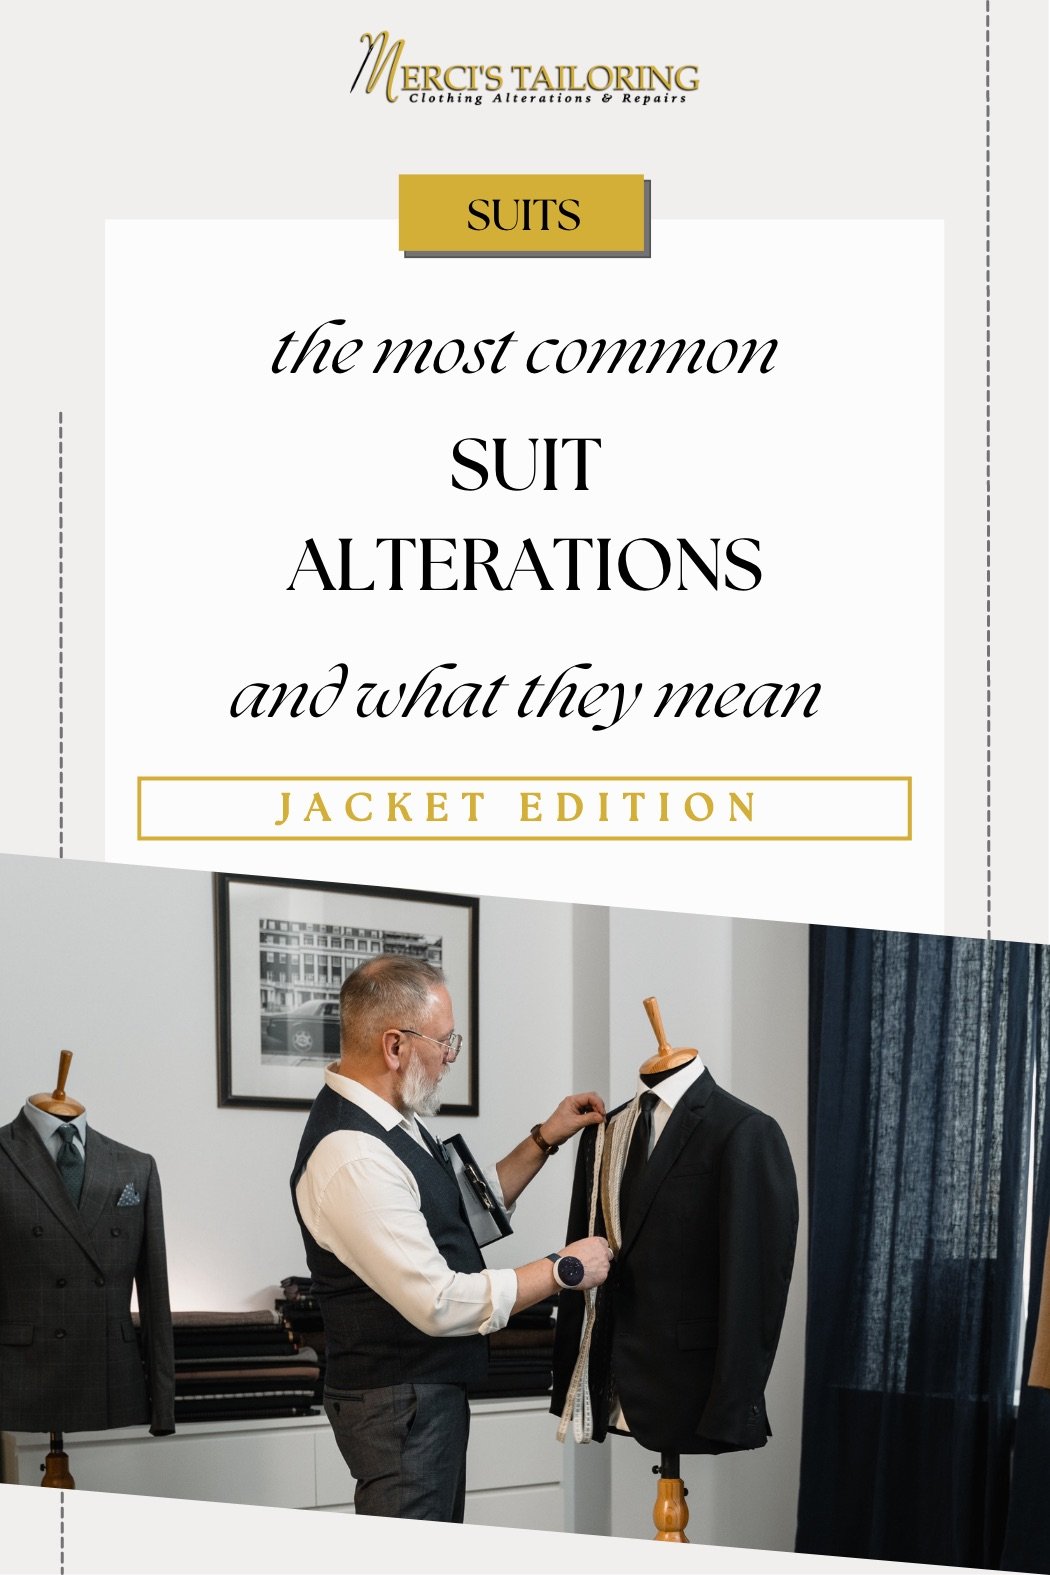 How Much Can Your Garment Be Altered by a Tailor? - Proper Cloth Help